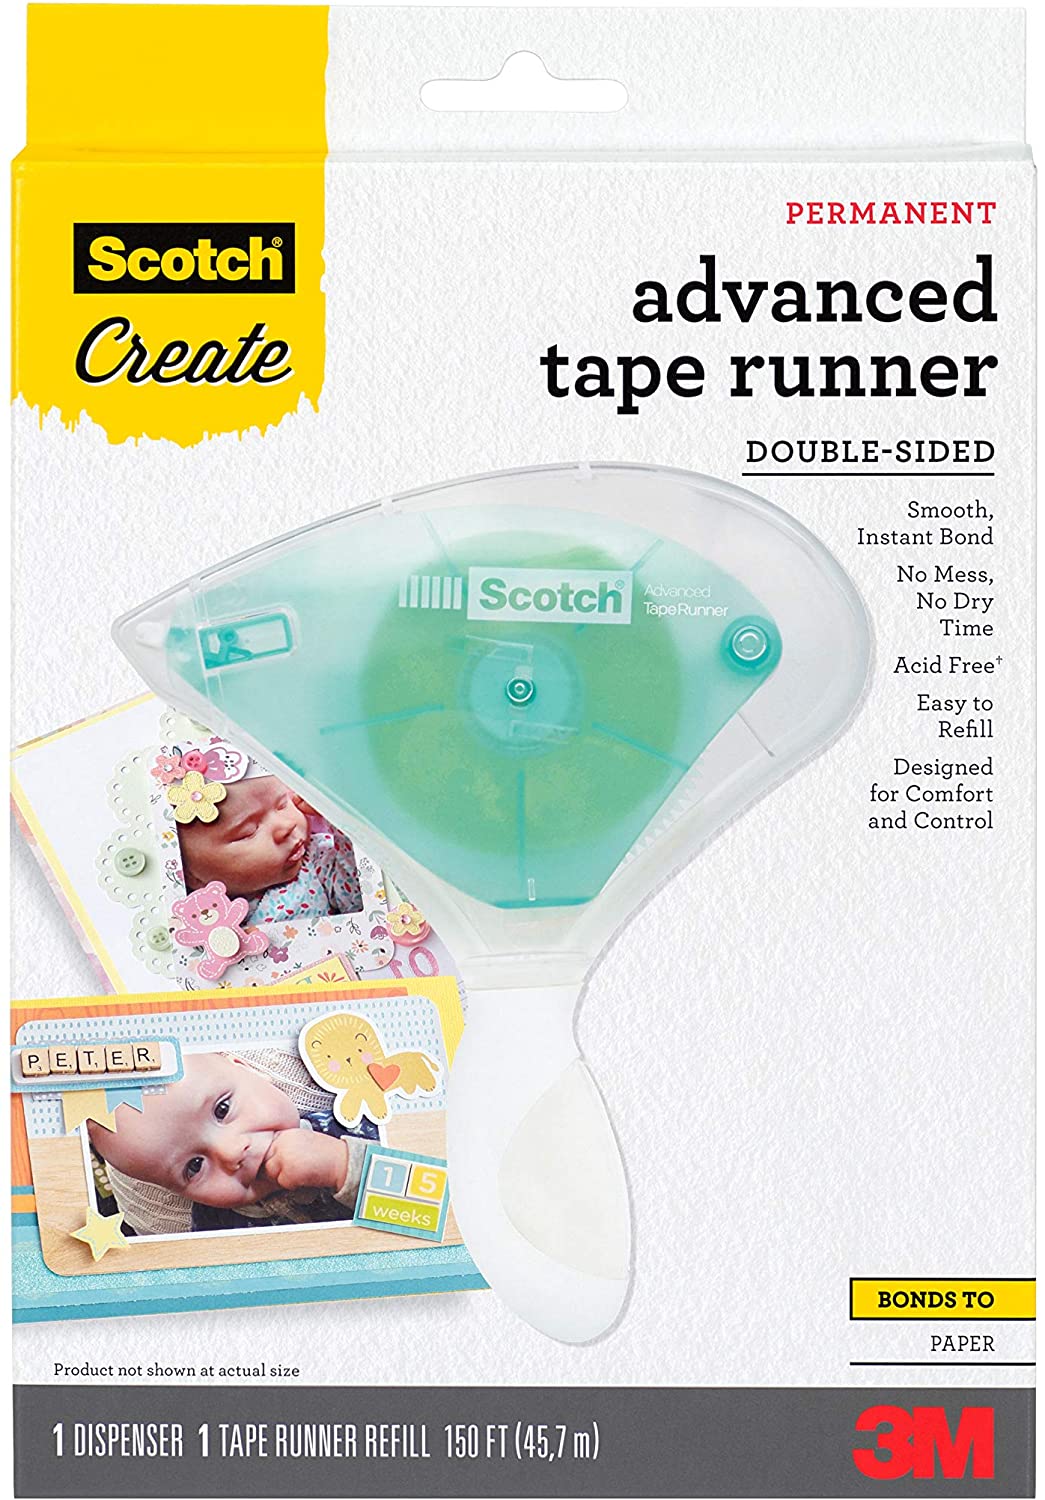 SVG Tuts | Scotch Permanent Advanced Double-Sided Tape Runner